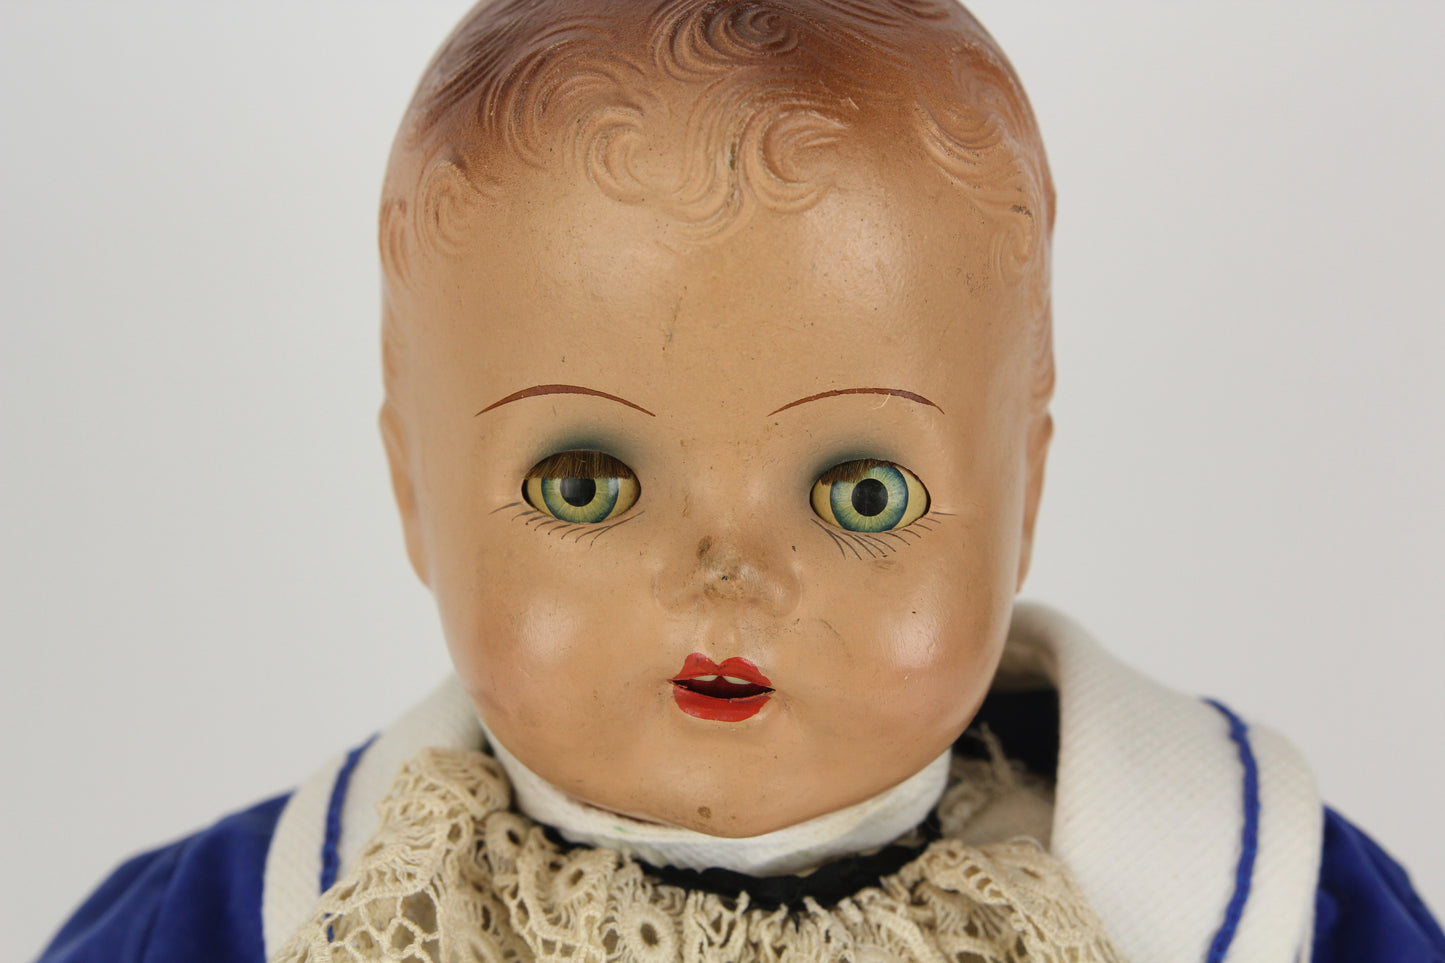 Composition Baby Boy Doll with Velvet Blue Outfit and Moving Blue Eyes, 22"